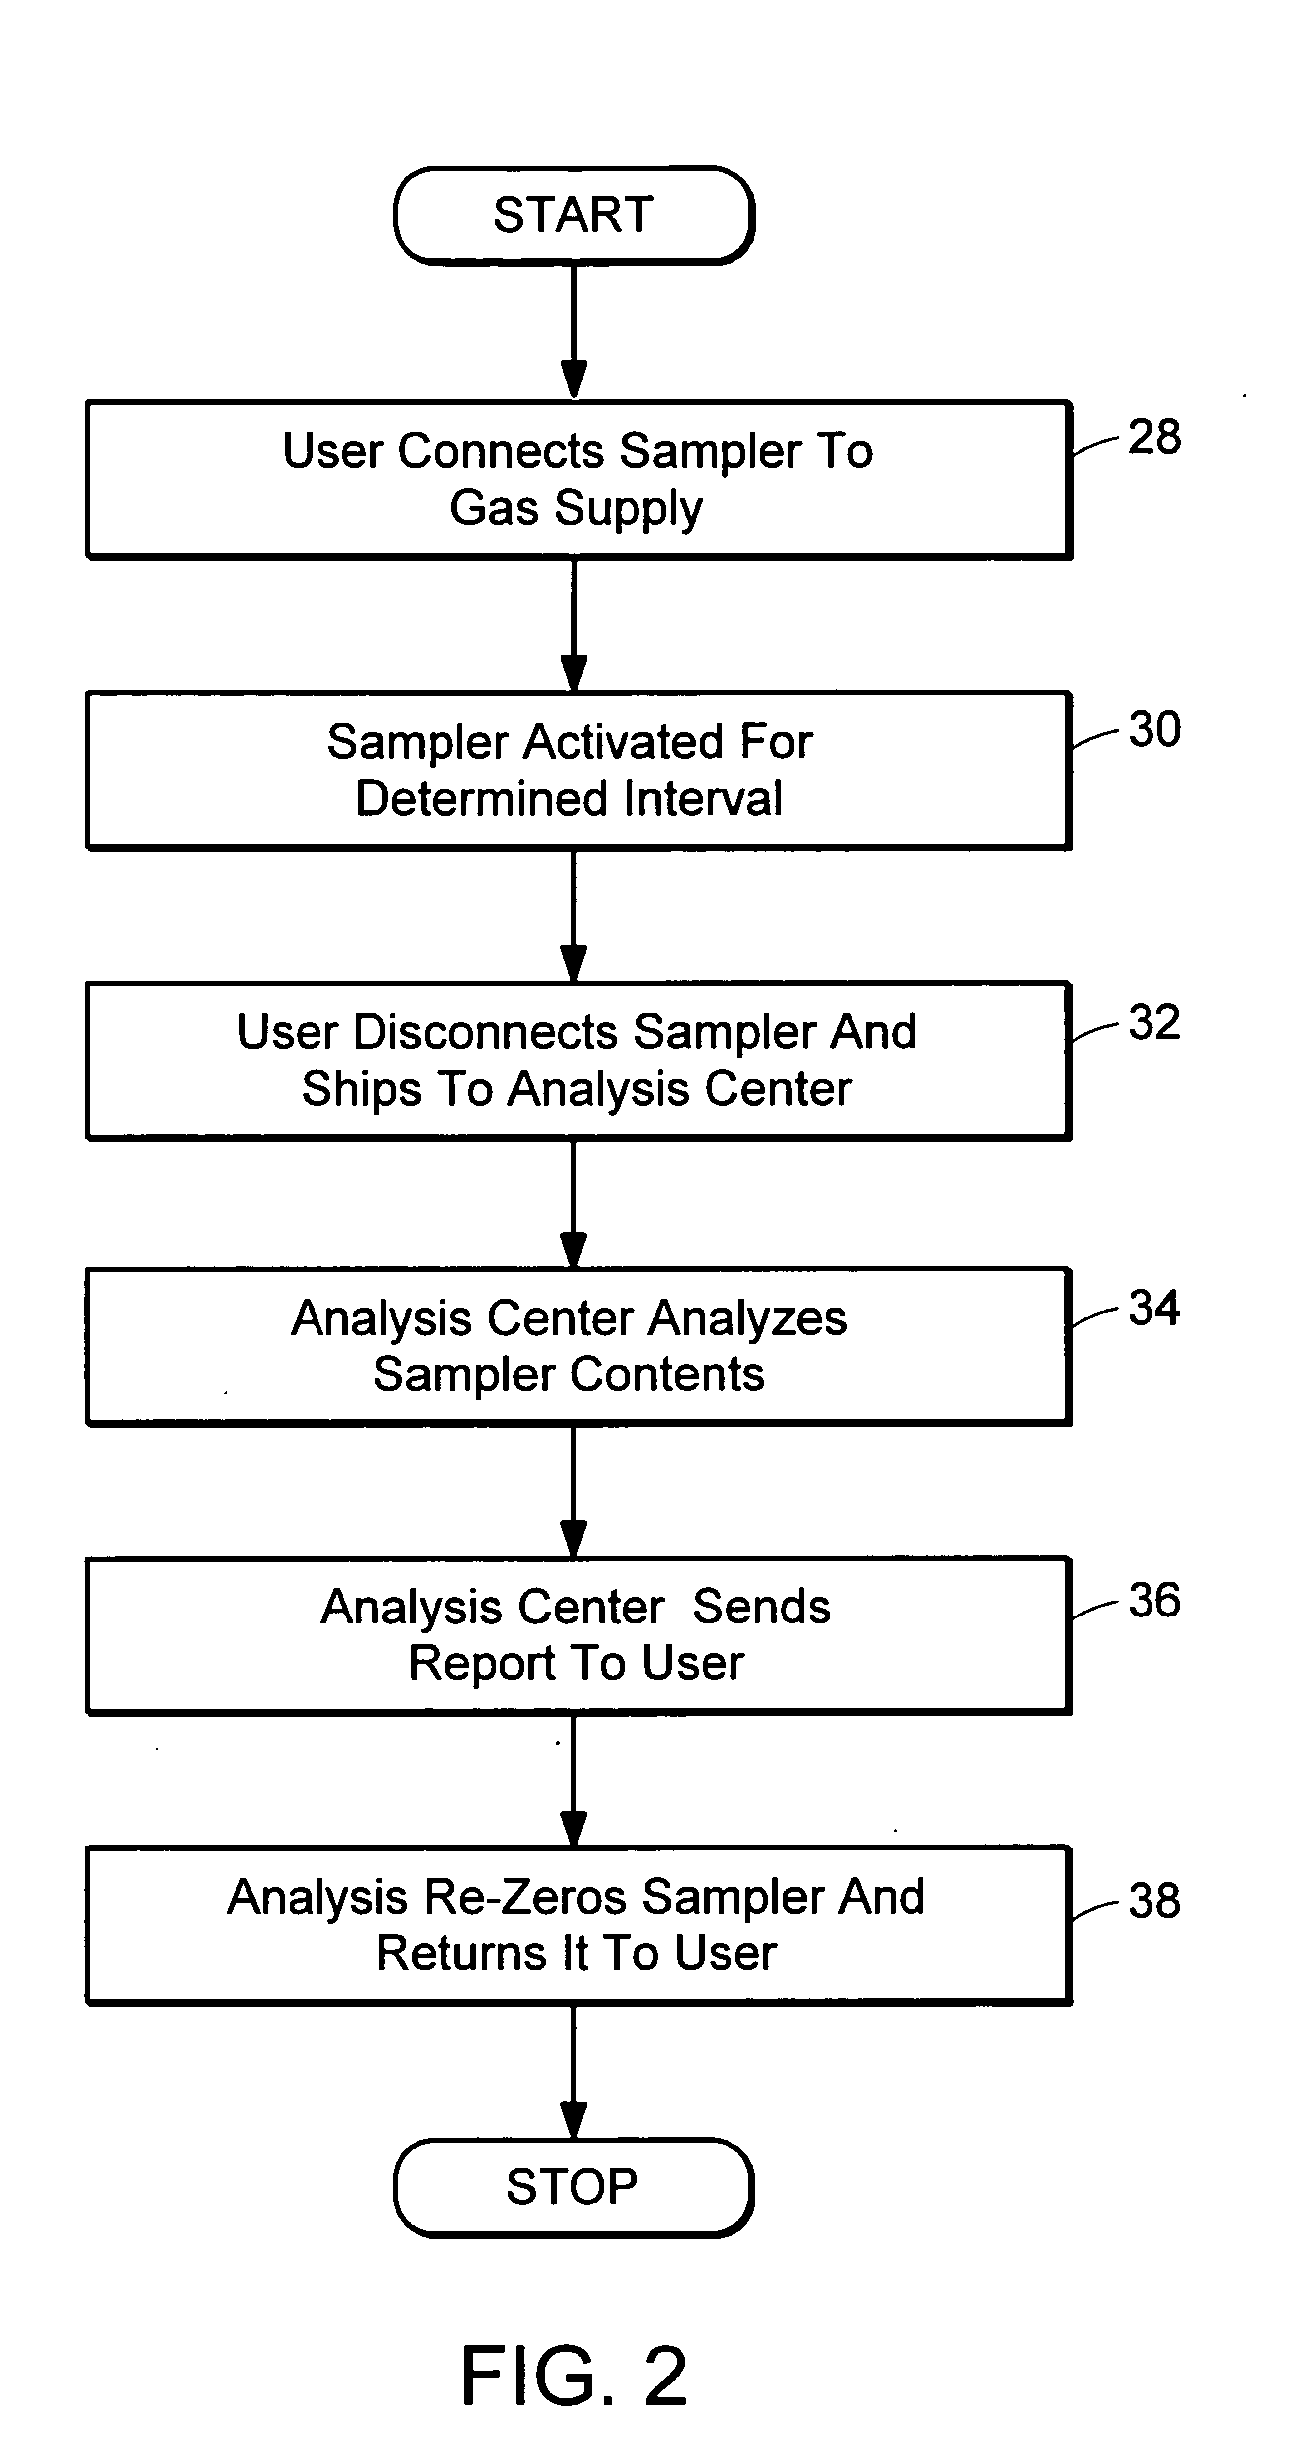 Systems and methods for detecting contaminants